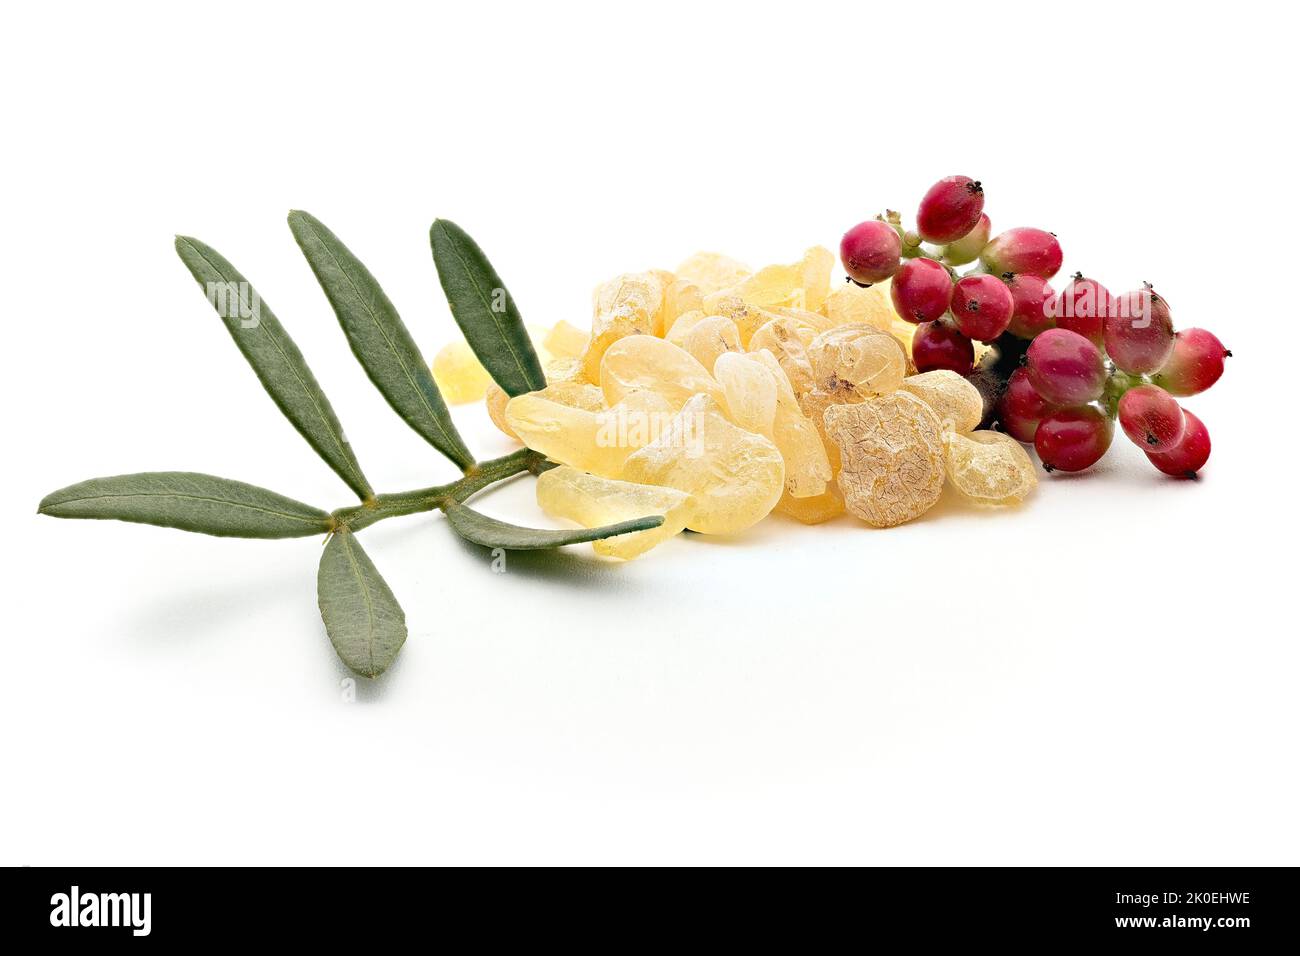 Chios mastic tears with lentisk (Pistacia lentiscus) leaves on a white background Stock Photo